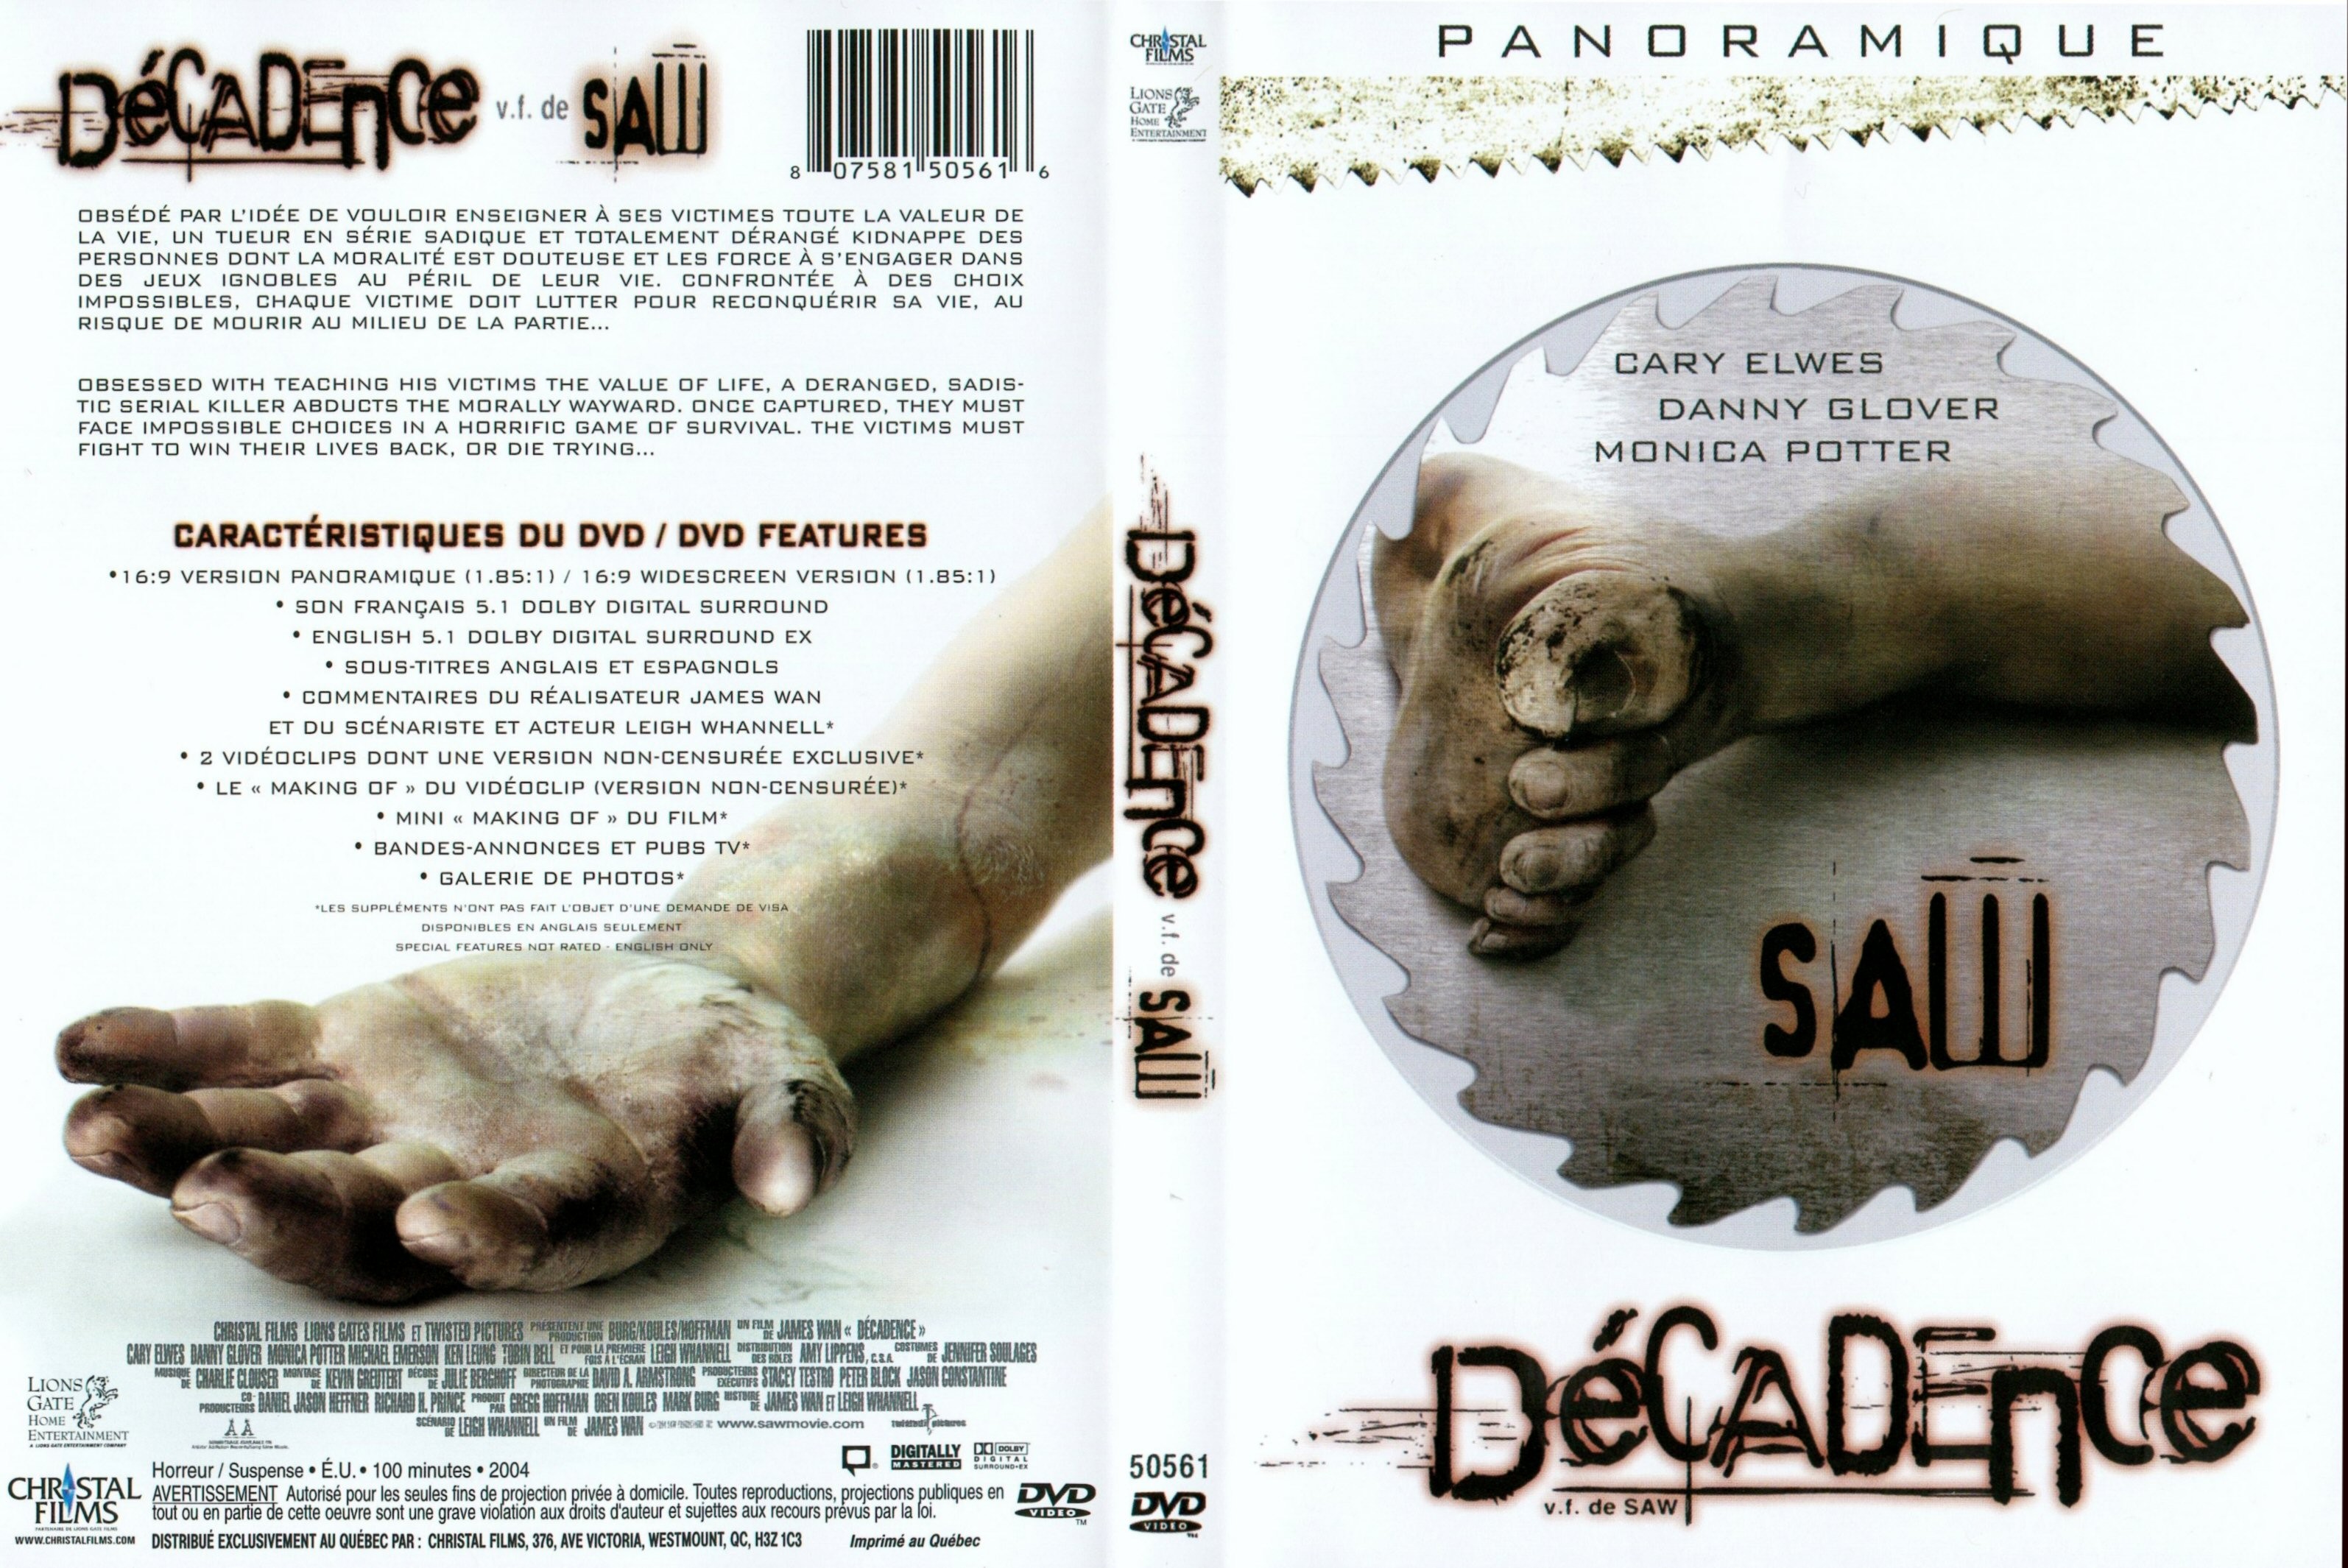 Jaquette DVD Dcadence